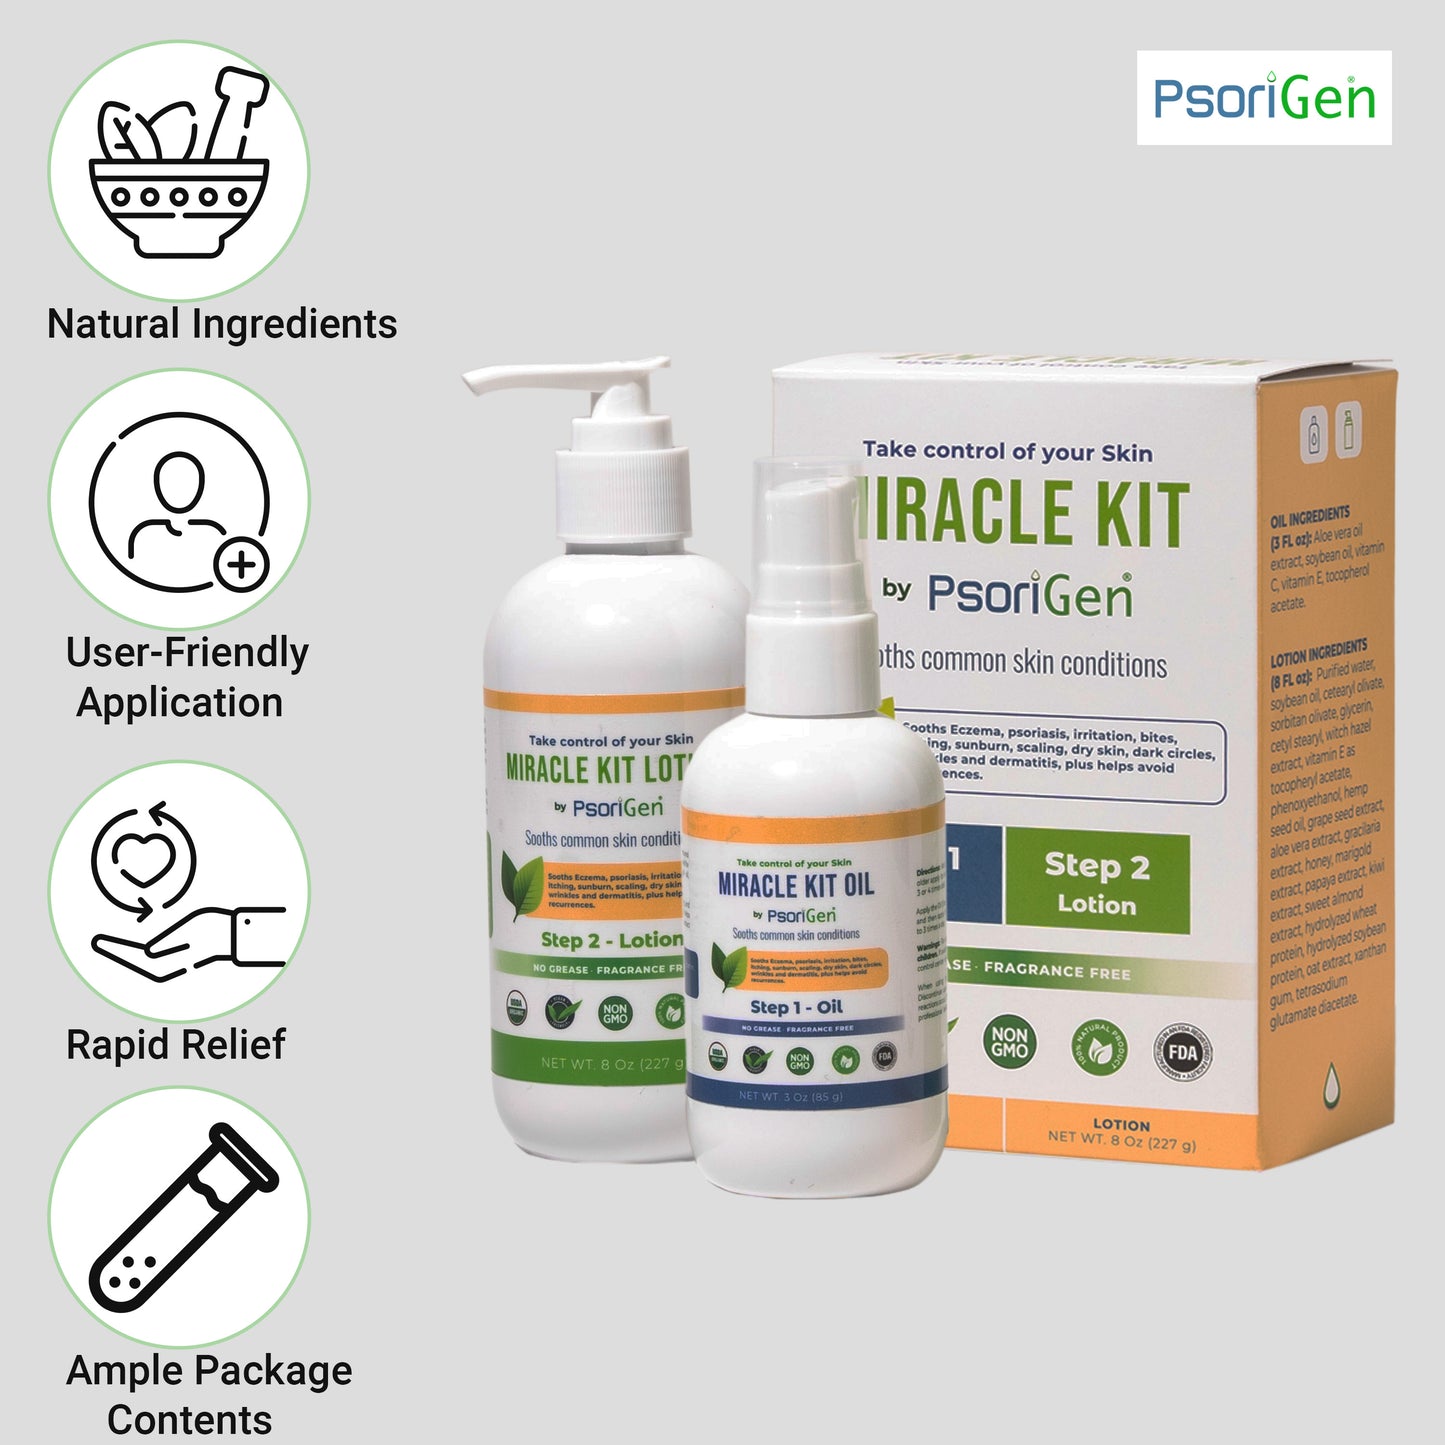 Miracle Kit by Psorigen